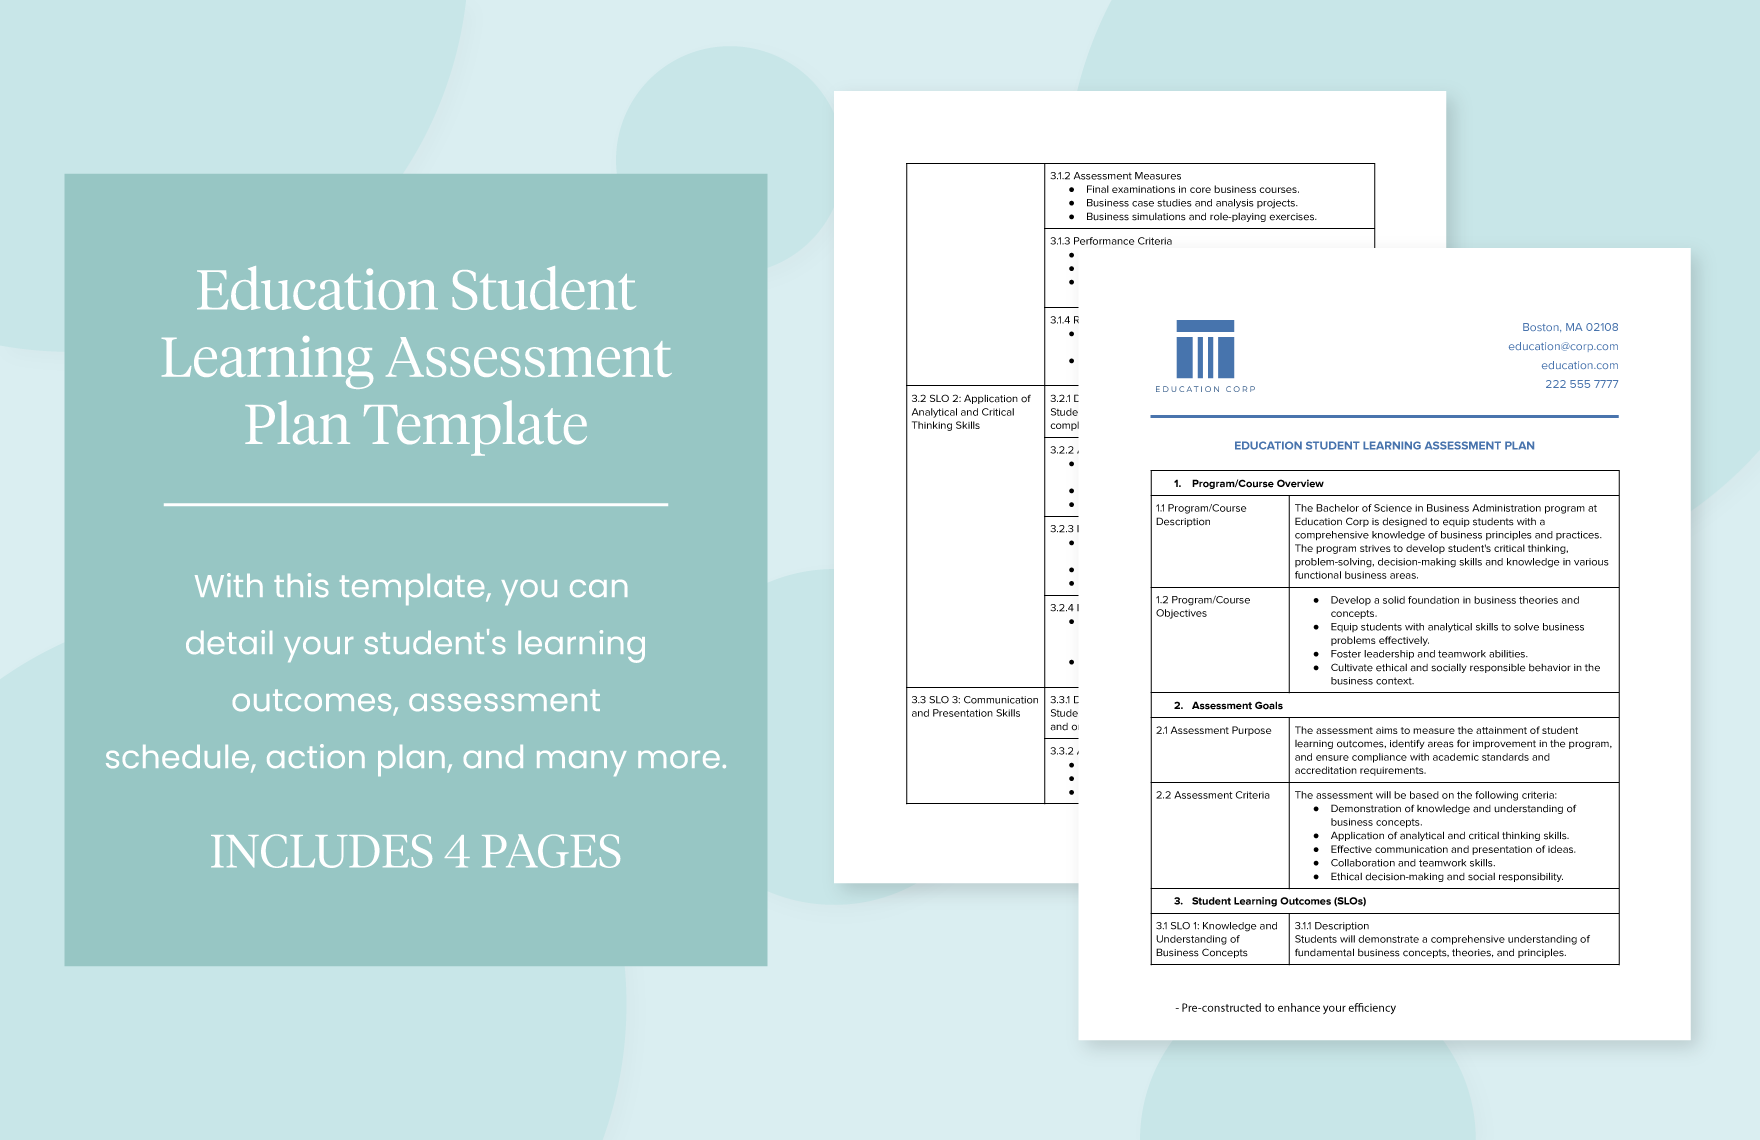 Education Student Learning Assessment Plan Template in Word, Google Docs, PDF